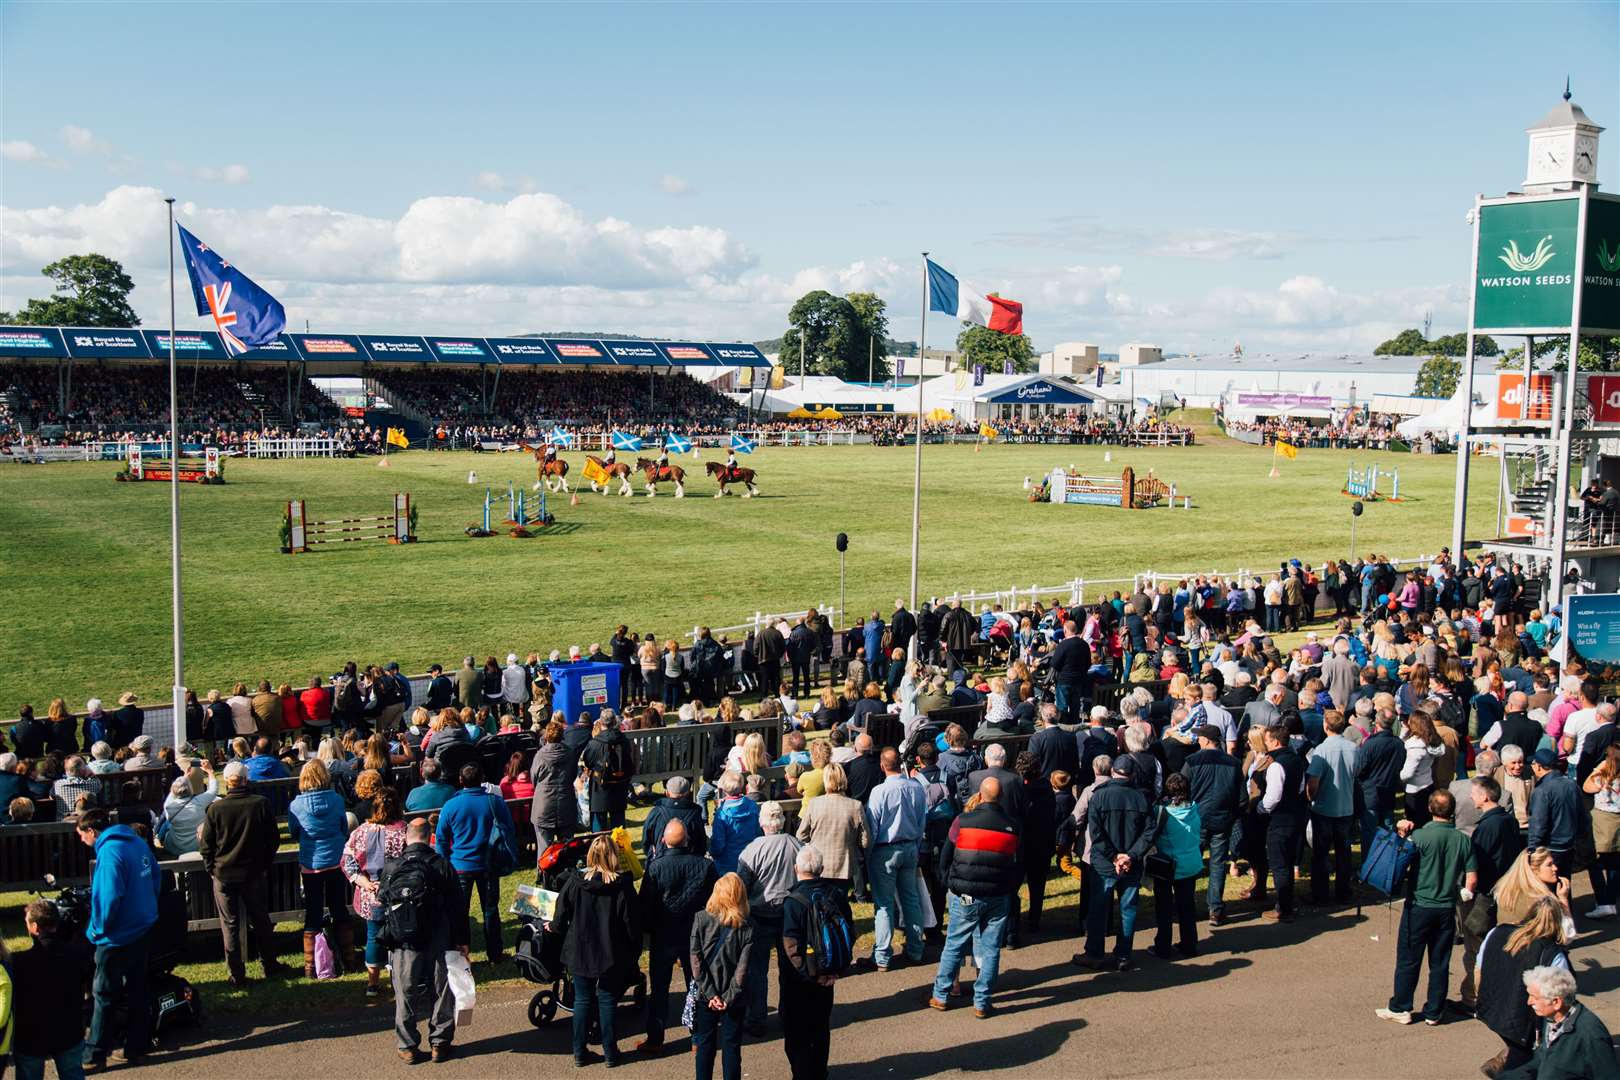 Friday at the Royal Highland Show in 2019.